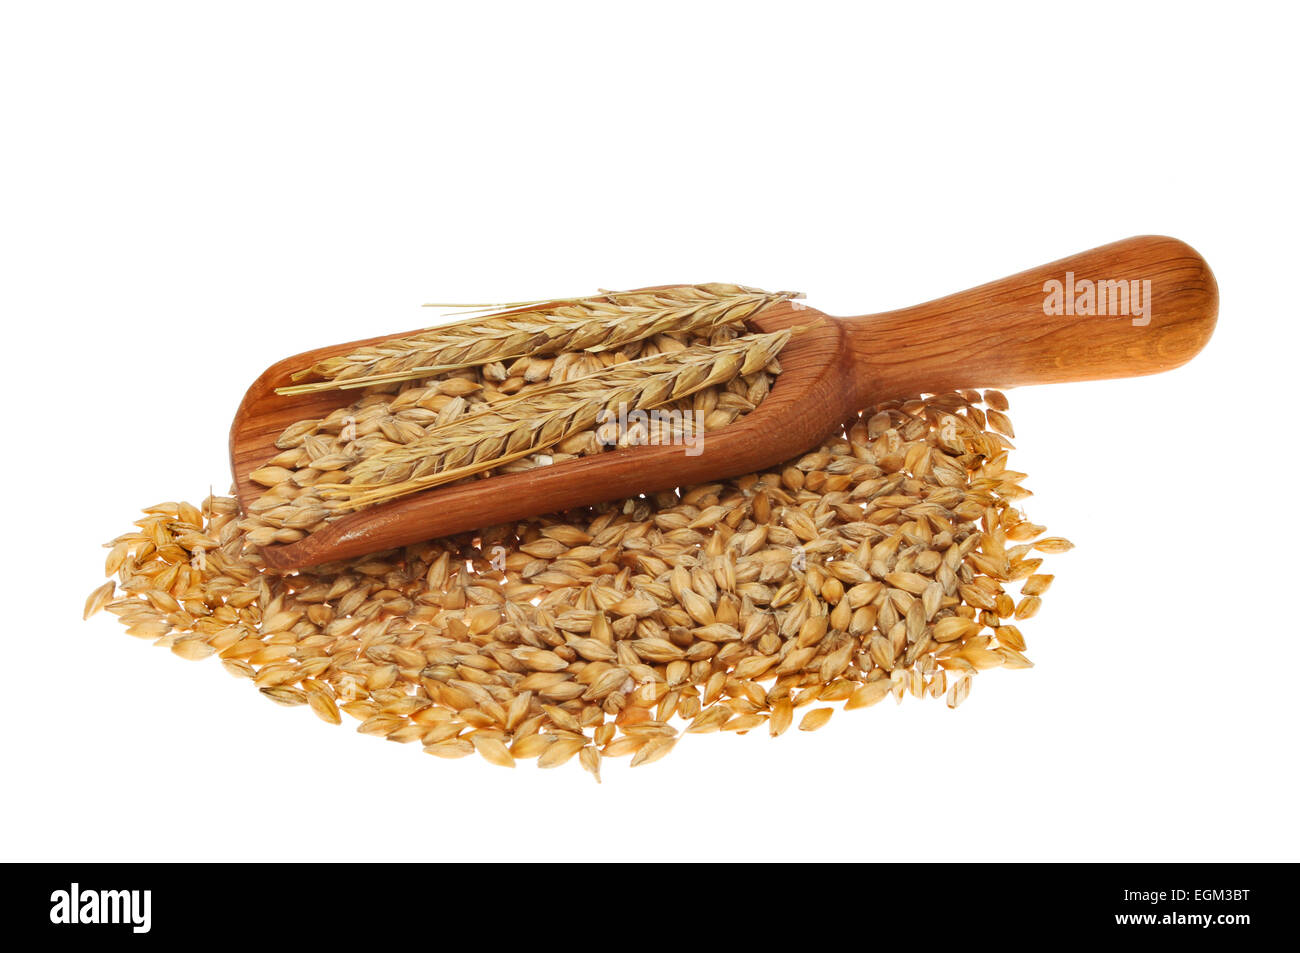 Barley grain and ear of barley in a wooden scoop isolated against white Stock Photo